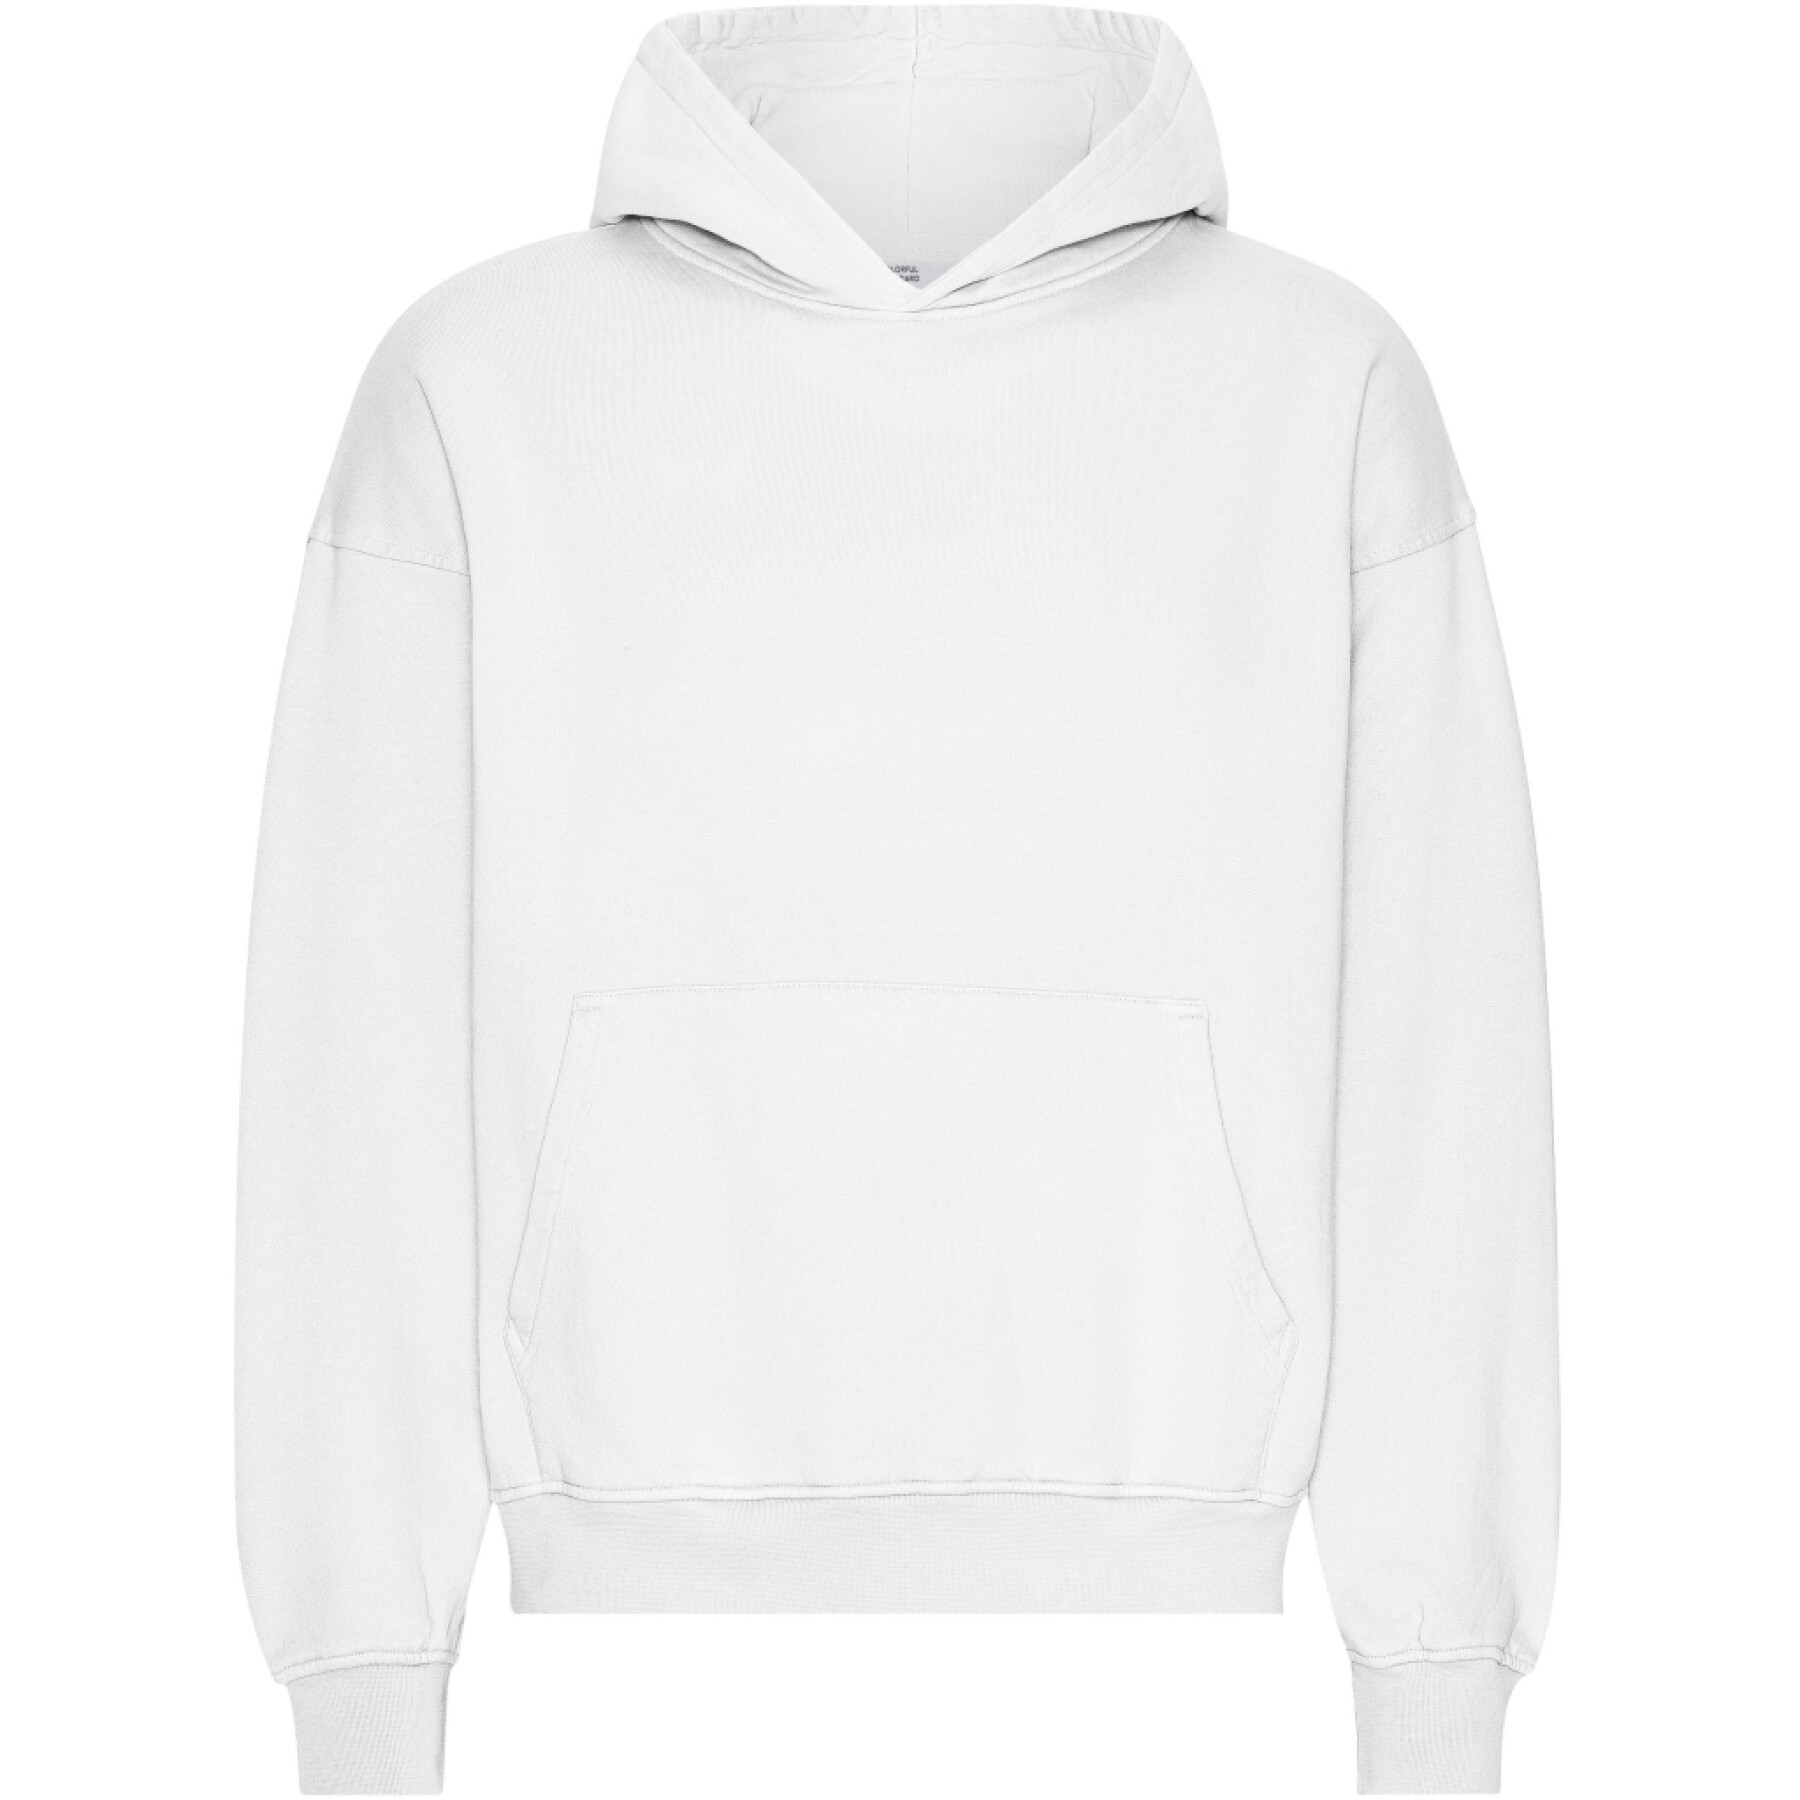 Oversized Hoodie Colorful Standard Organic Optical White